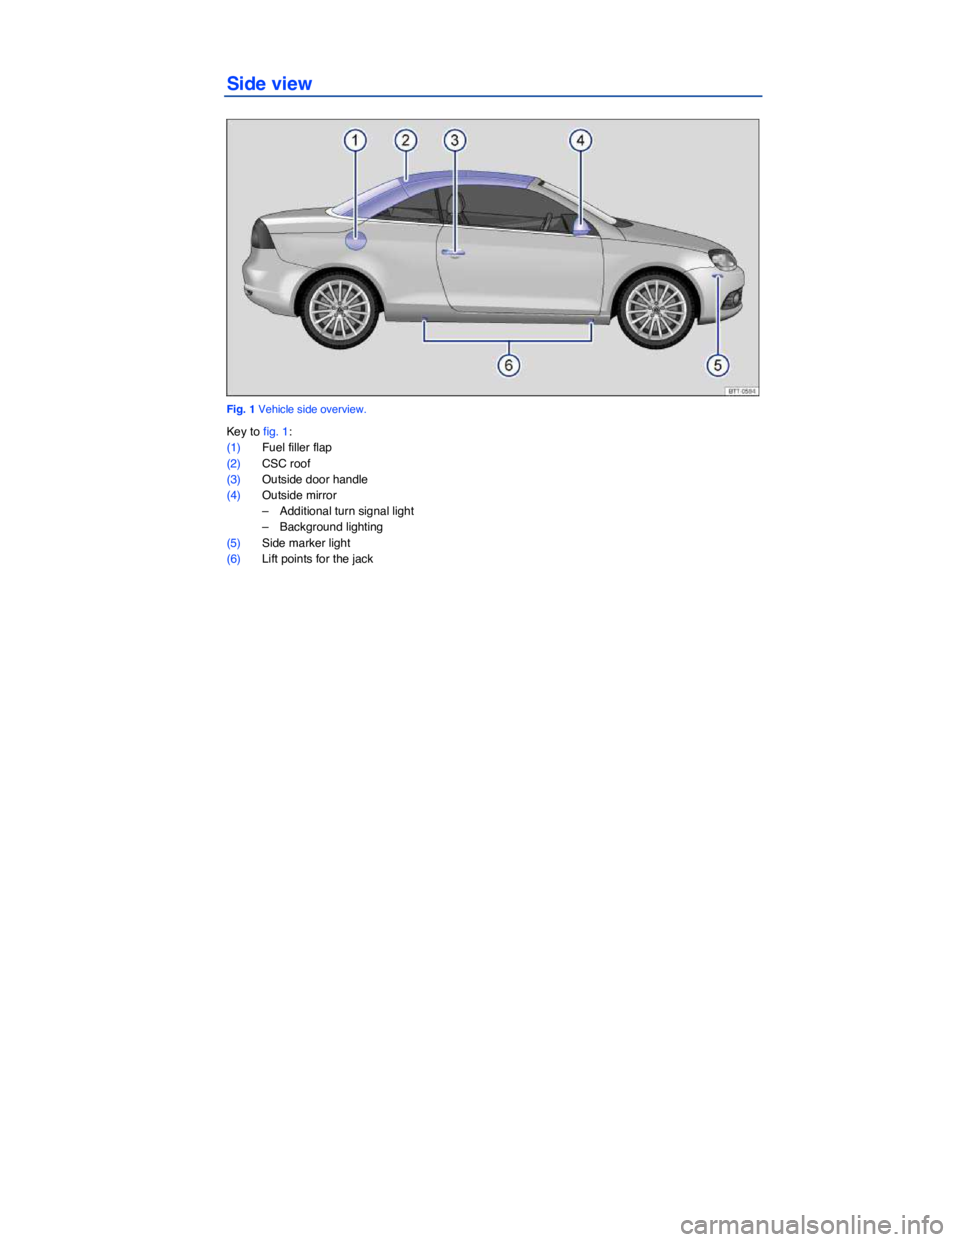 VOLKSWAGEN EOS 2012  Owners Manual  
 
Side view 
 
Fig. 1 Vehicle side overview. 
Key to fig. 1: 
(1) Fuel filler flap  
(2) CSC roof  
(3) Outside door handle  
(4) Outside mirror  
–  Additional turn signal light  
–  Background